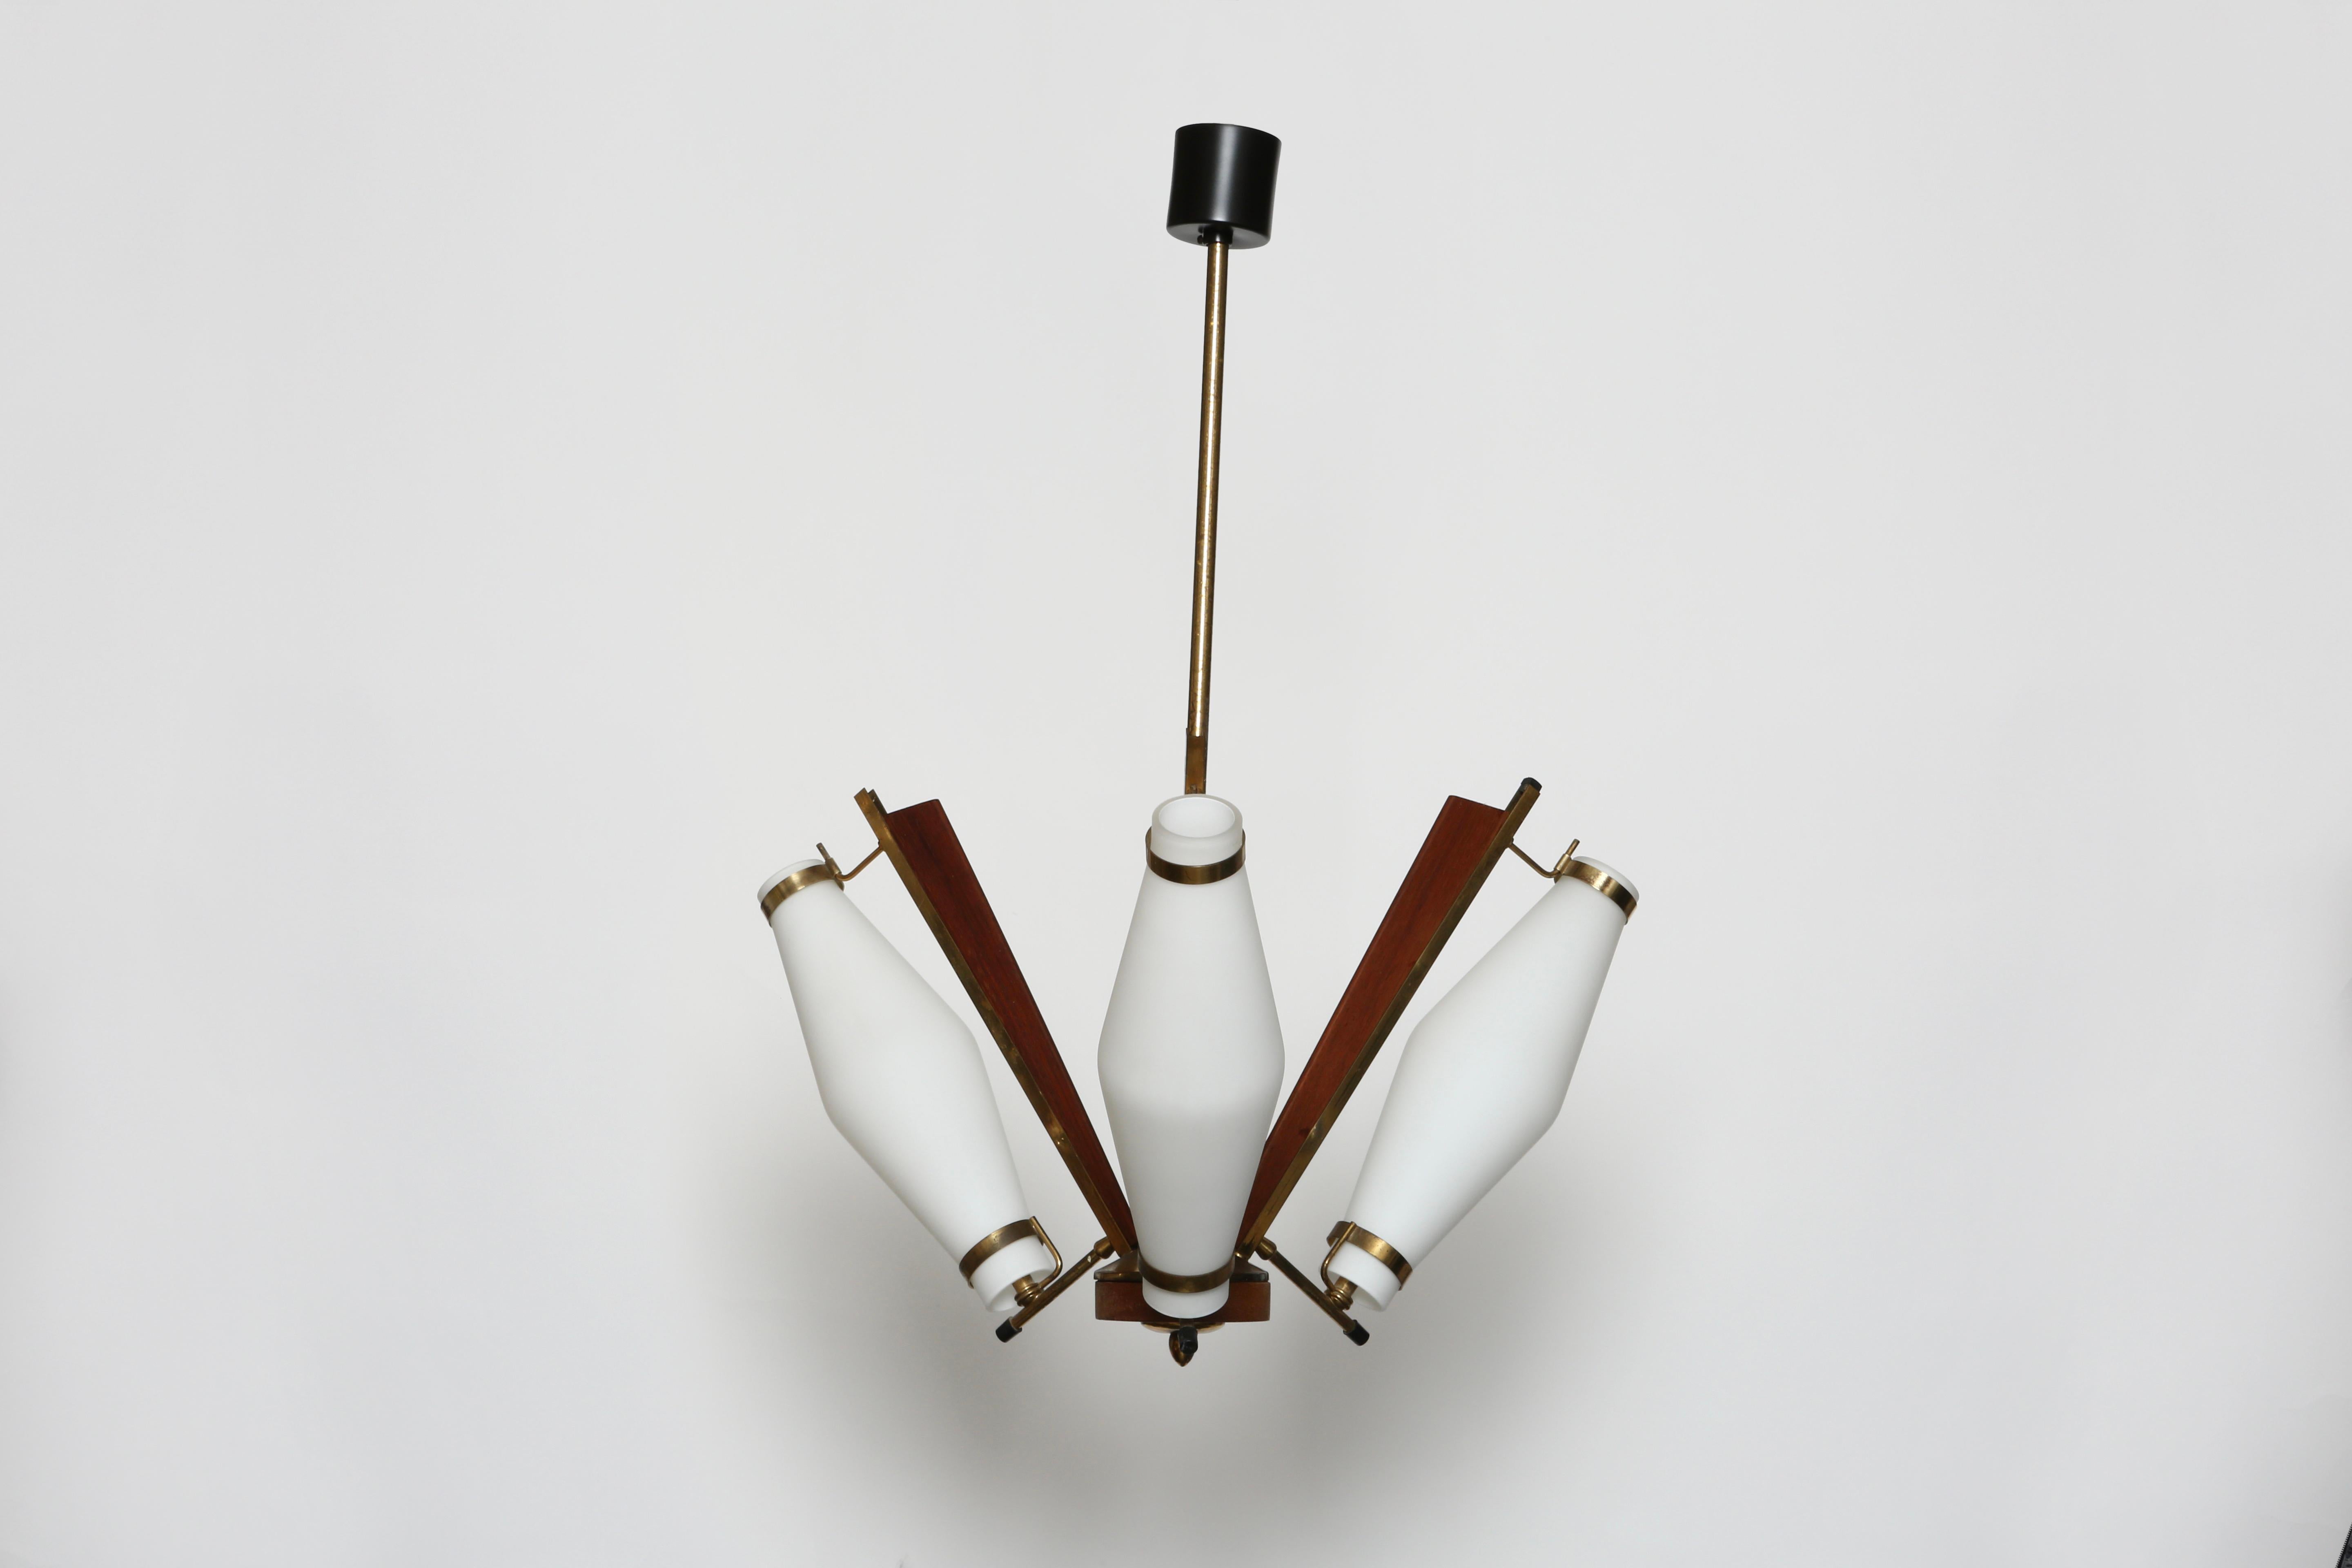 Stilnovo style ceiling pendant.
White matte opaline glass, wood and brass frame.
Made in Italy in 1960s.
Complimentary US rewiring with a custom ceiling plate upon request.
Takes 3 candelabra sockets.
Overall drop ( height) is adjustable, can